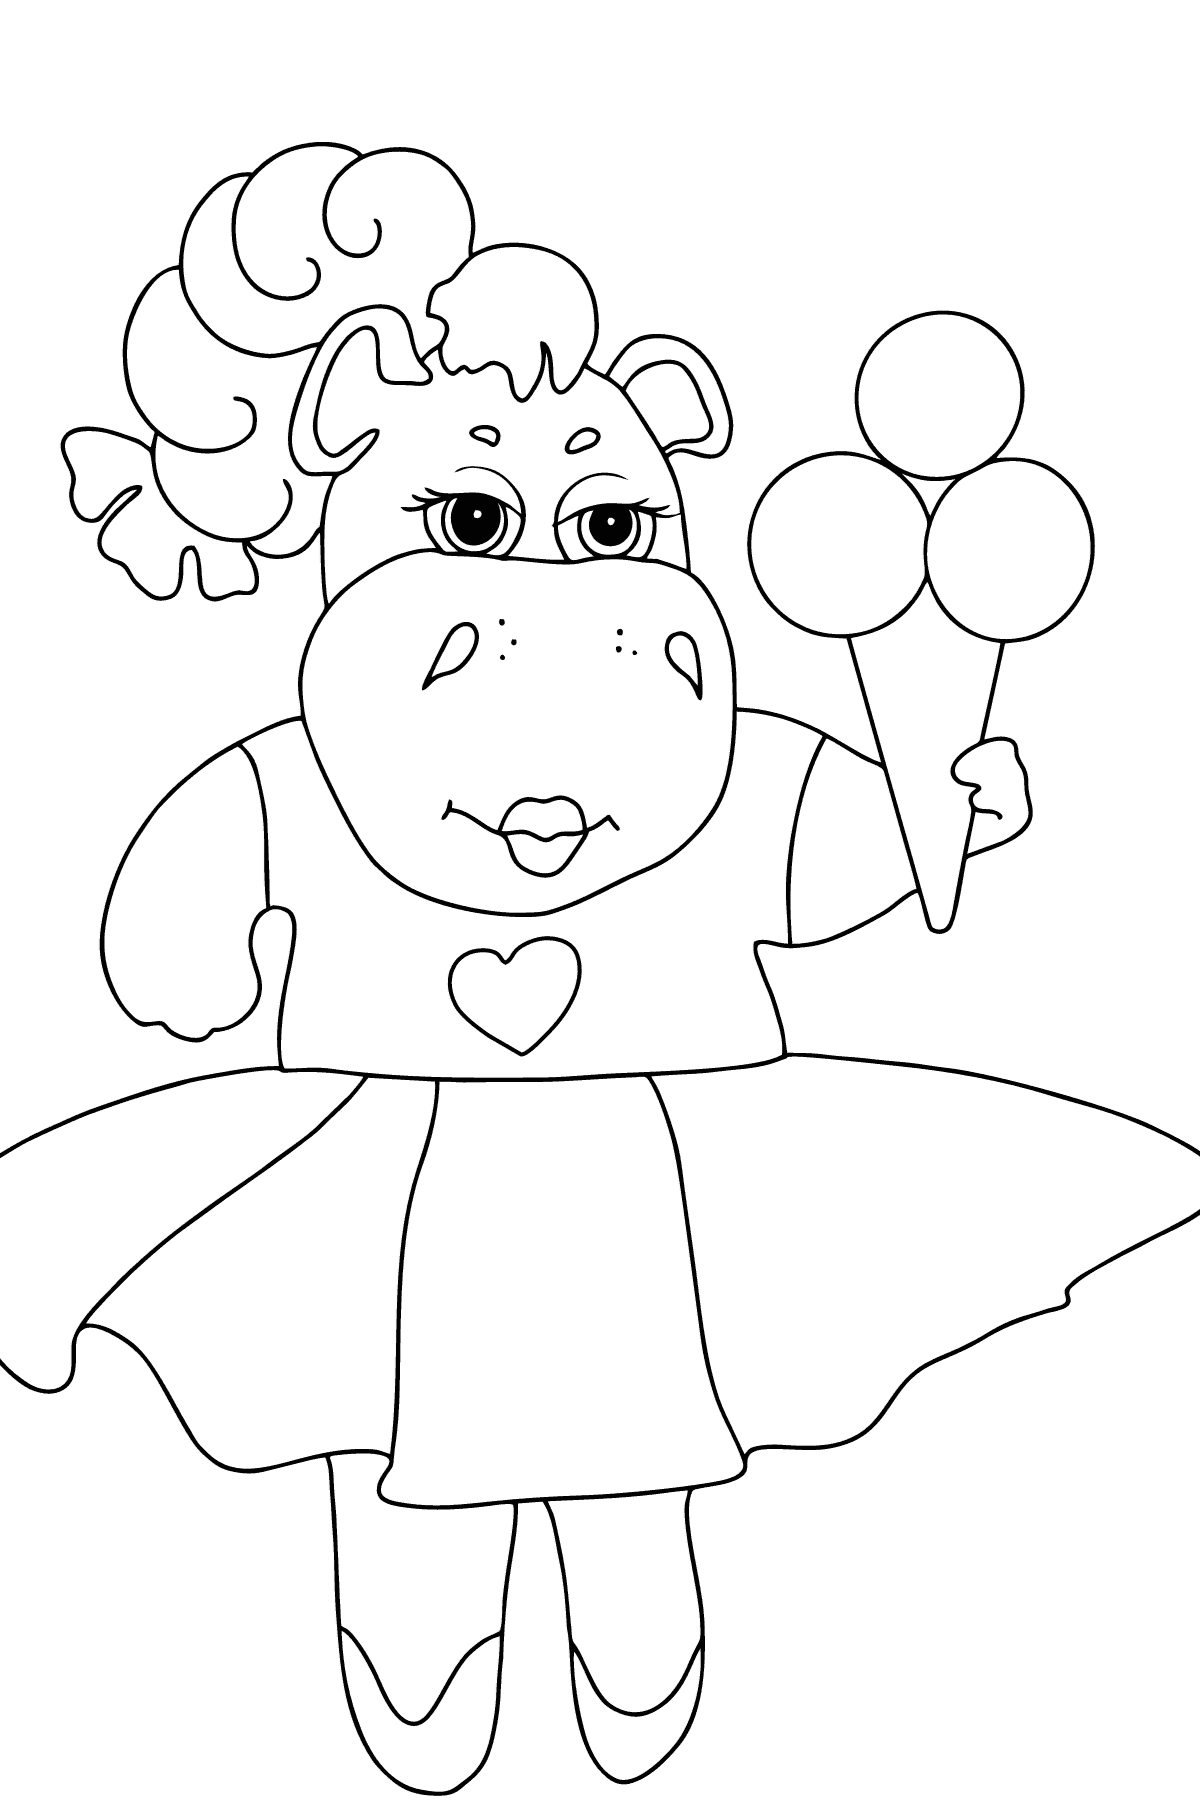 Charming Hippo coloring page - Coloring Pages for Kids